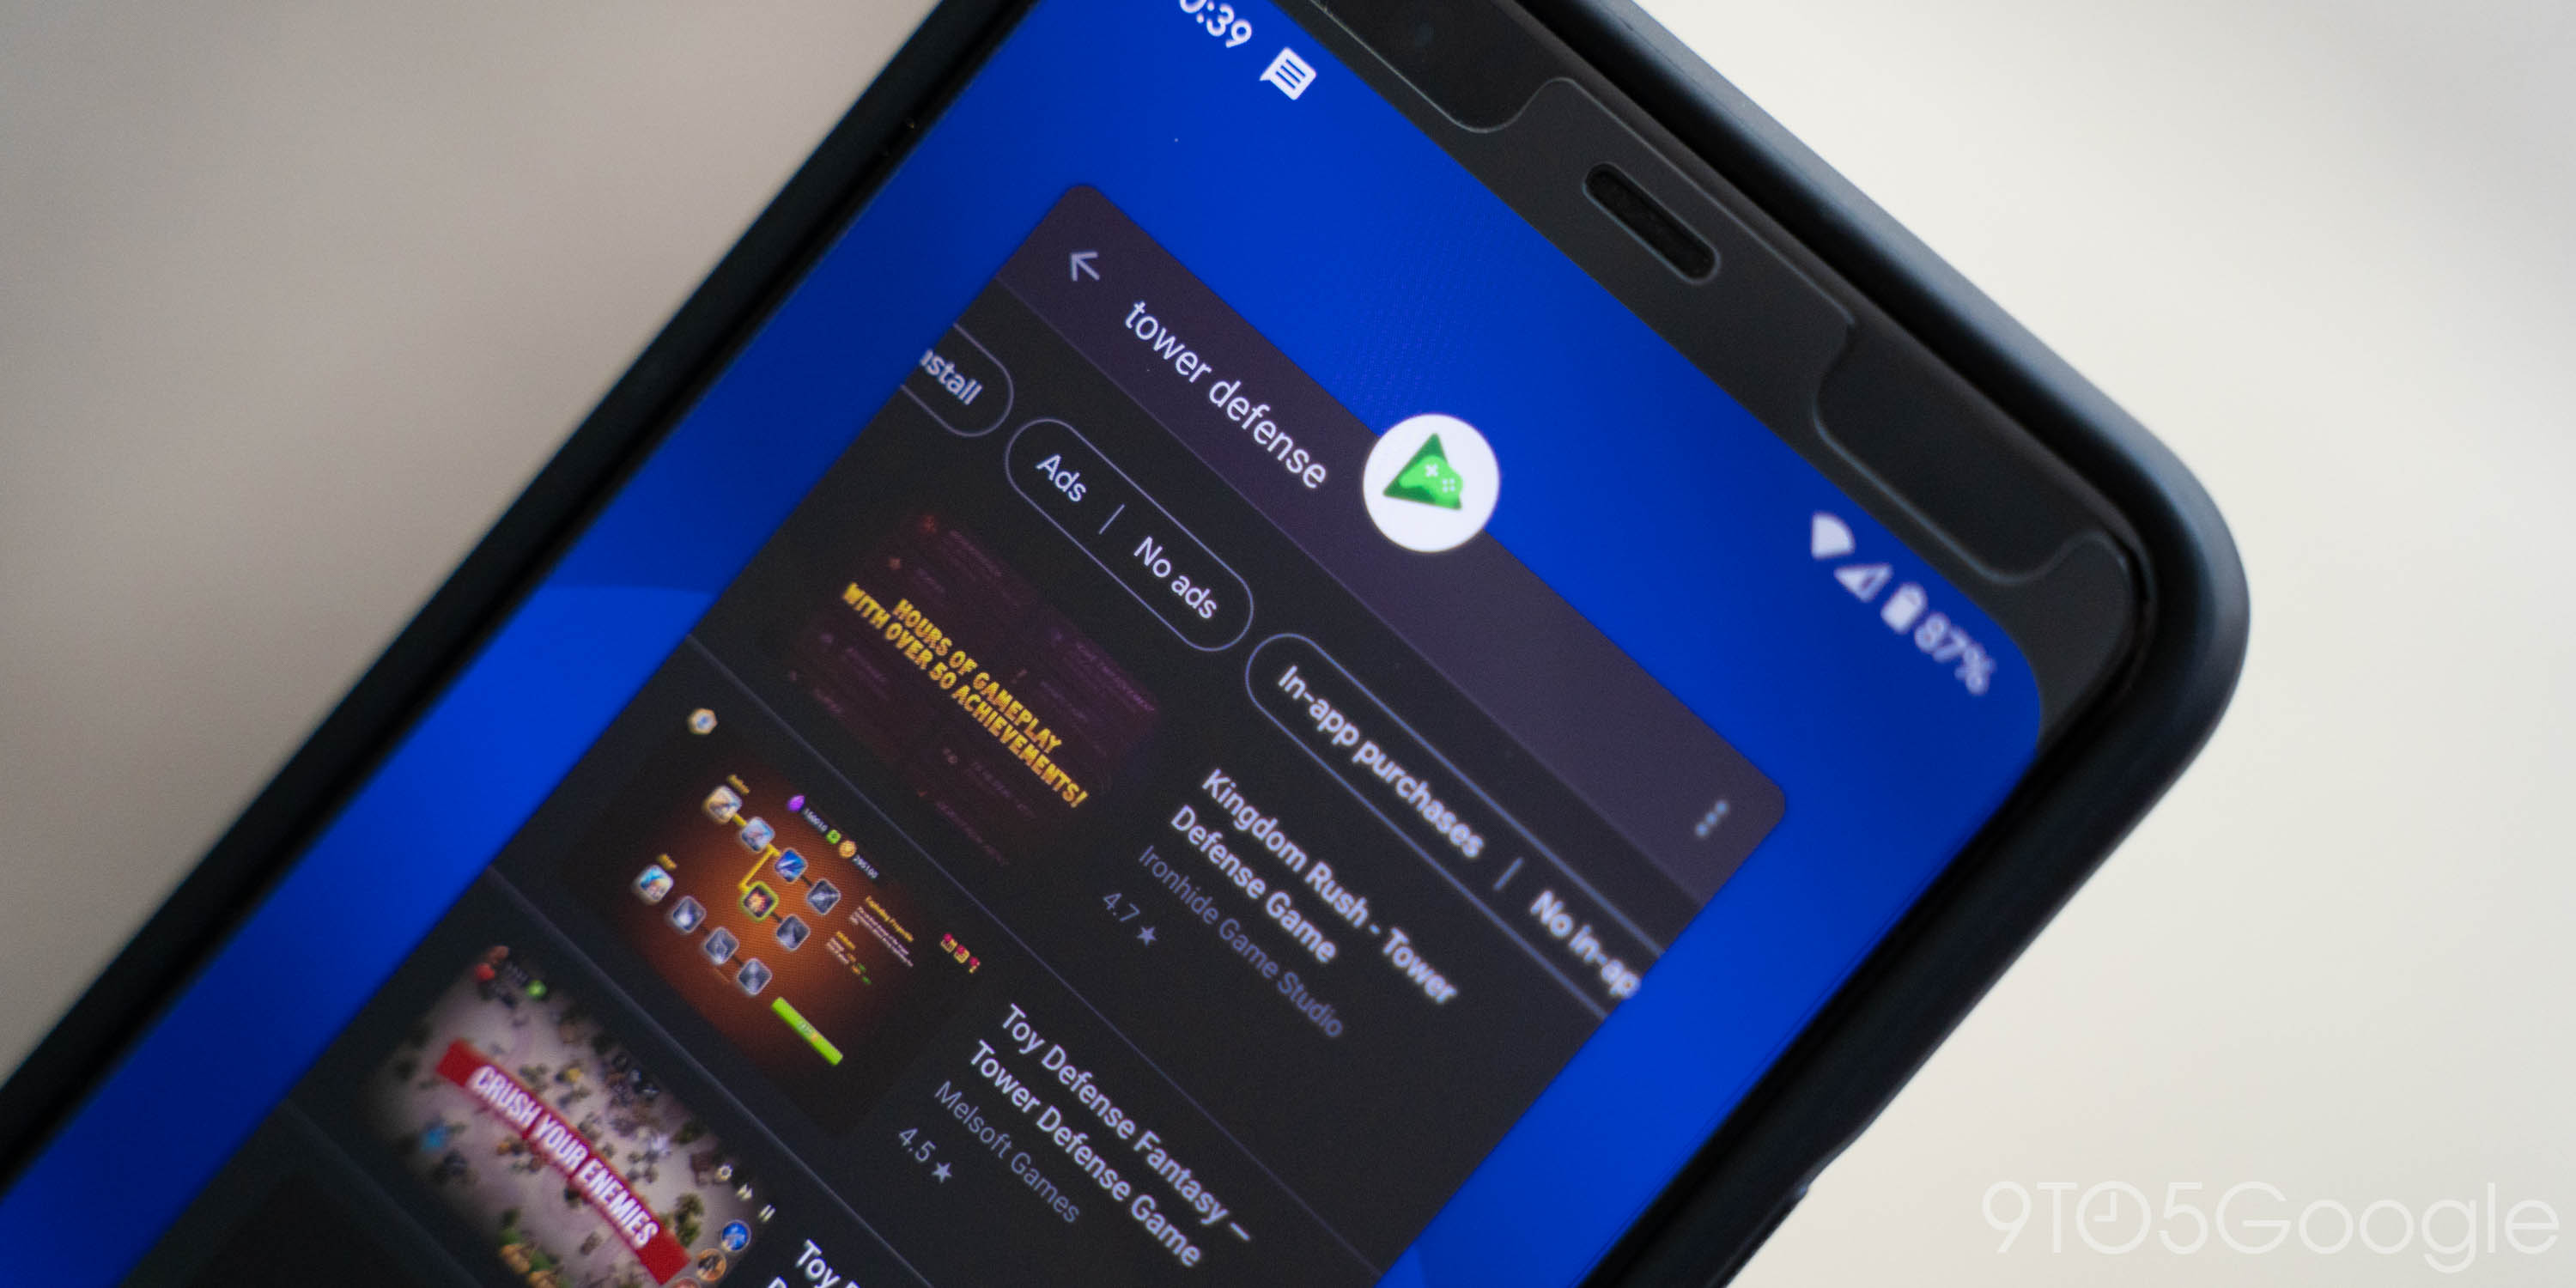 Google Play Games Rolls Out Games Folder On Your Homescreen